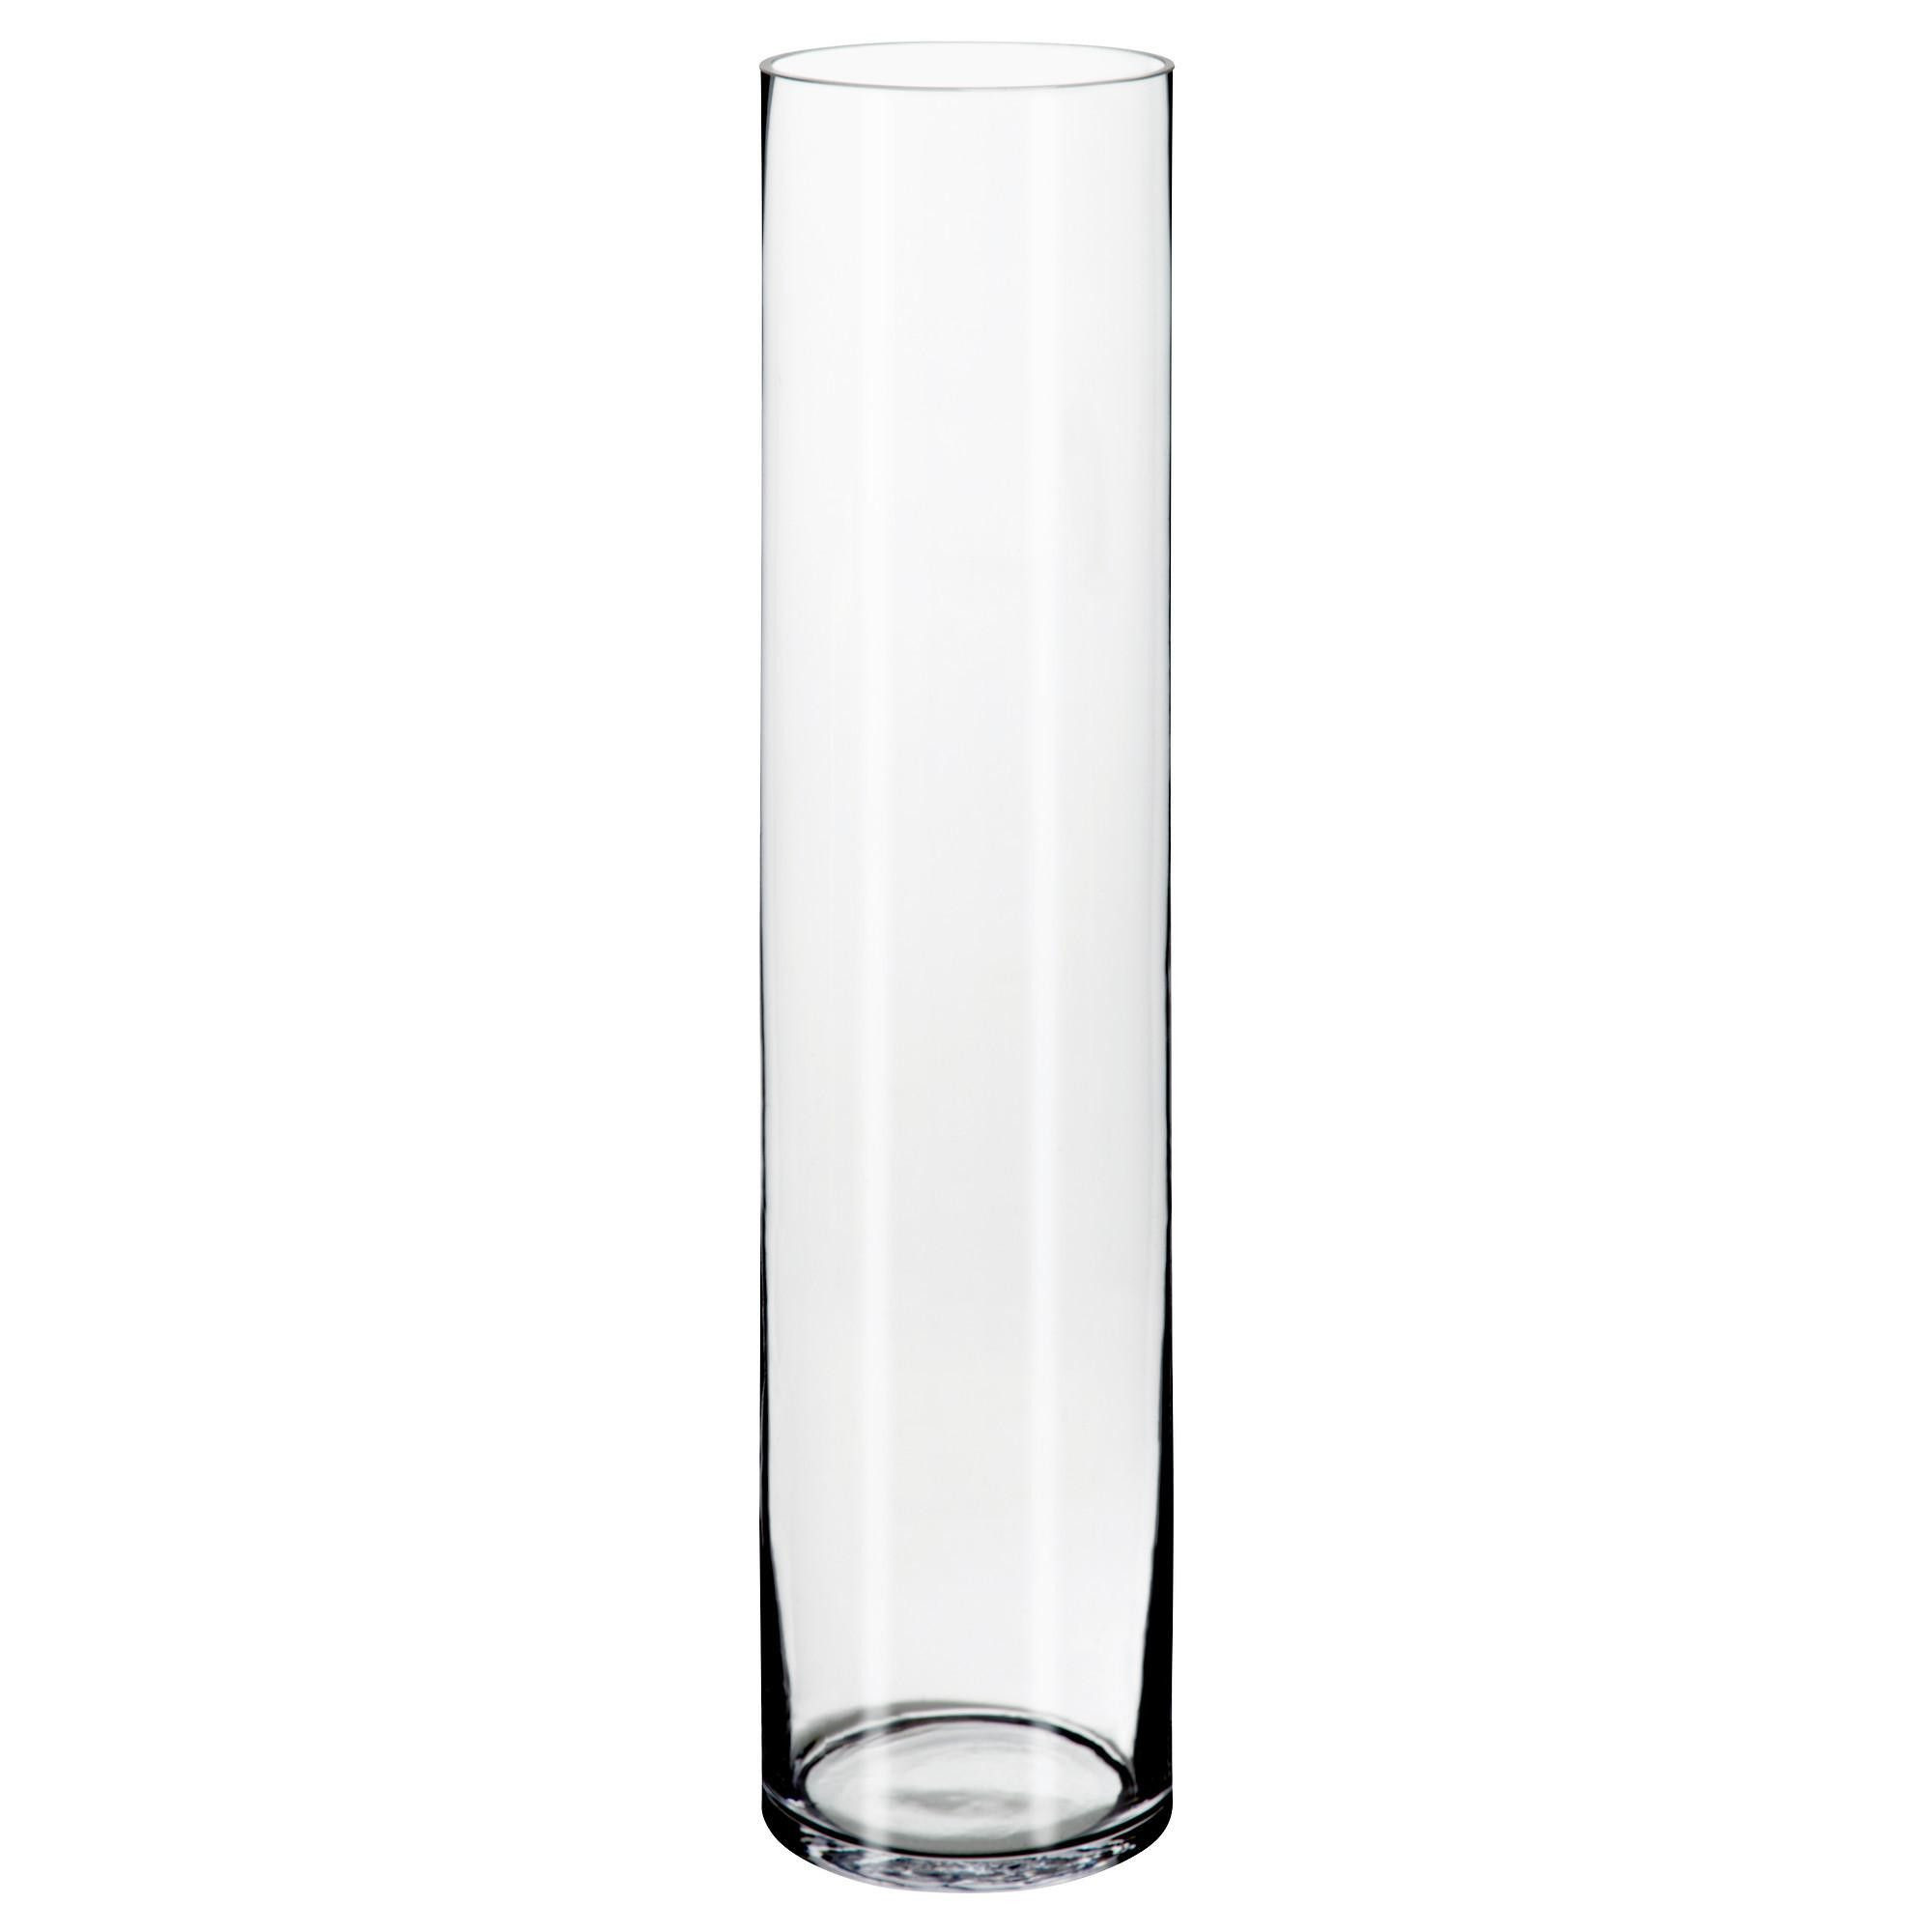 25 Unique 9 Inch Glass Vase 2024 free download 9 inch glass vase of 50 smoked glass vase the weekly world throughout coloring colored glass vases elegant living room vase glass fresh